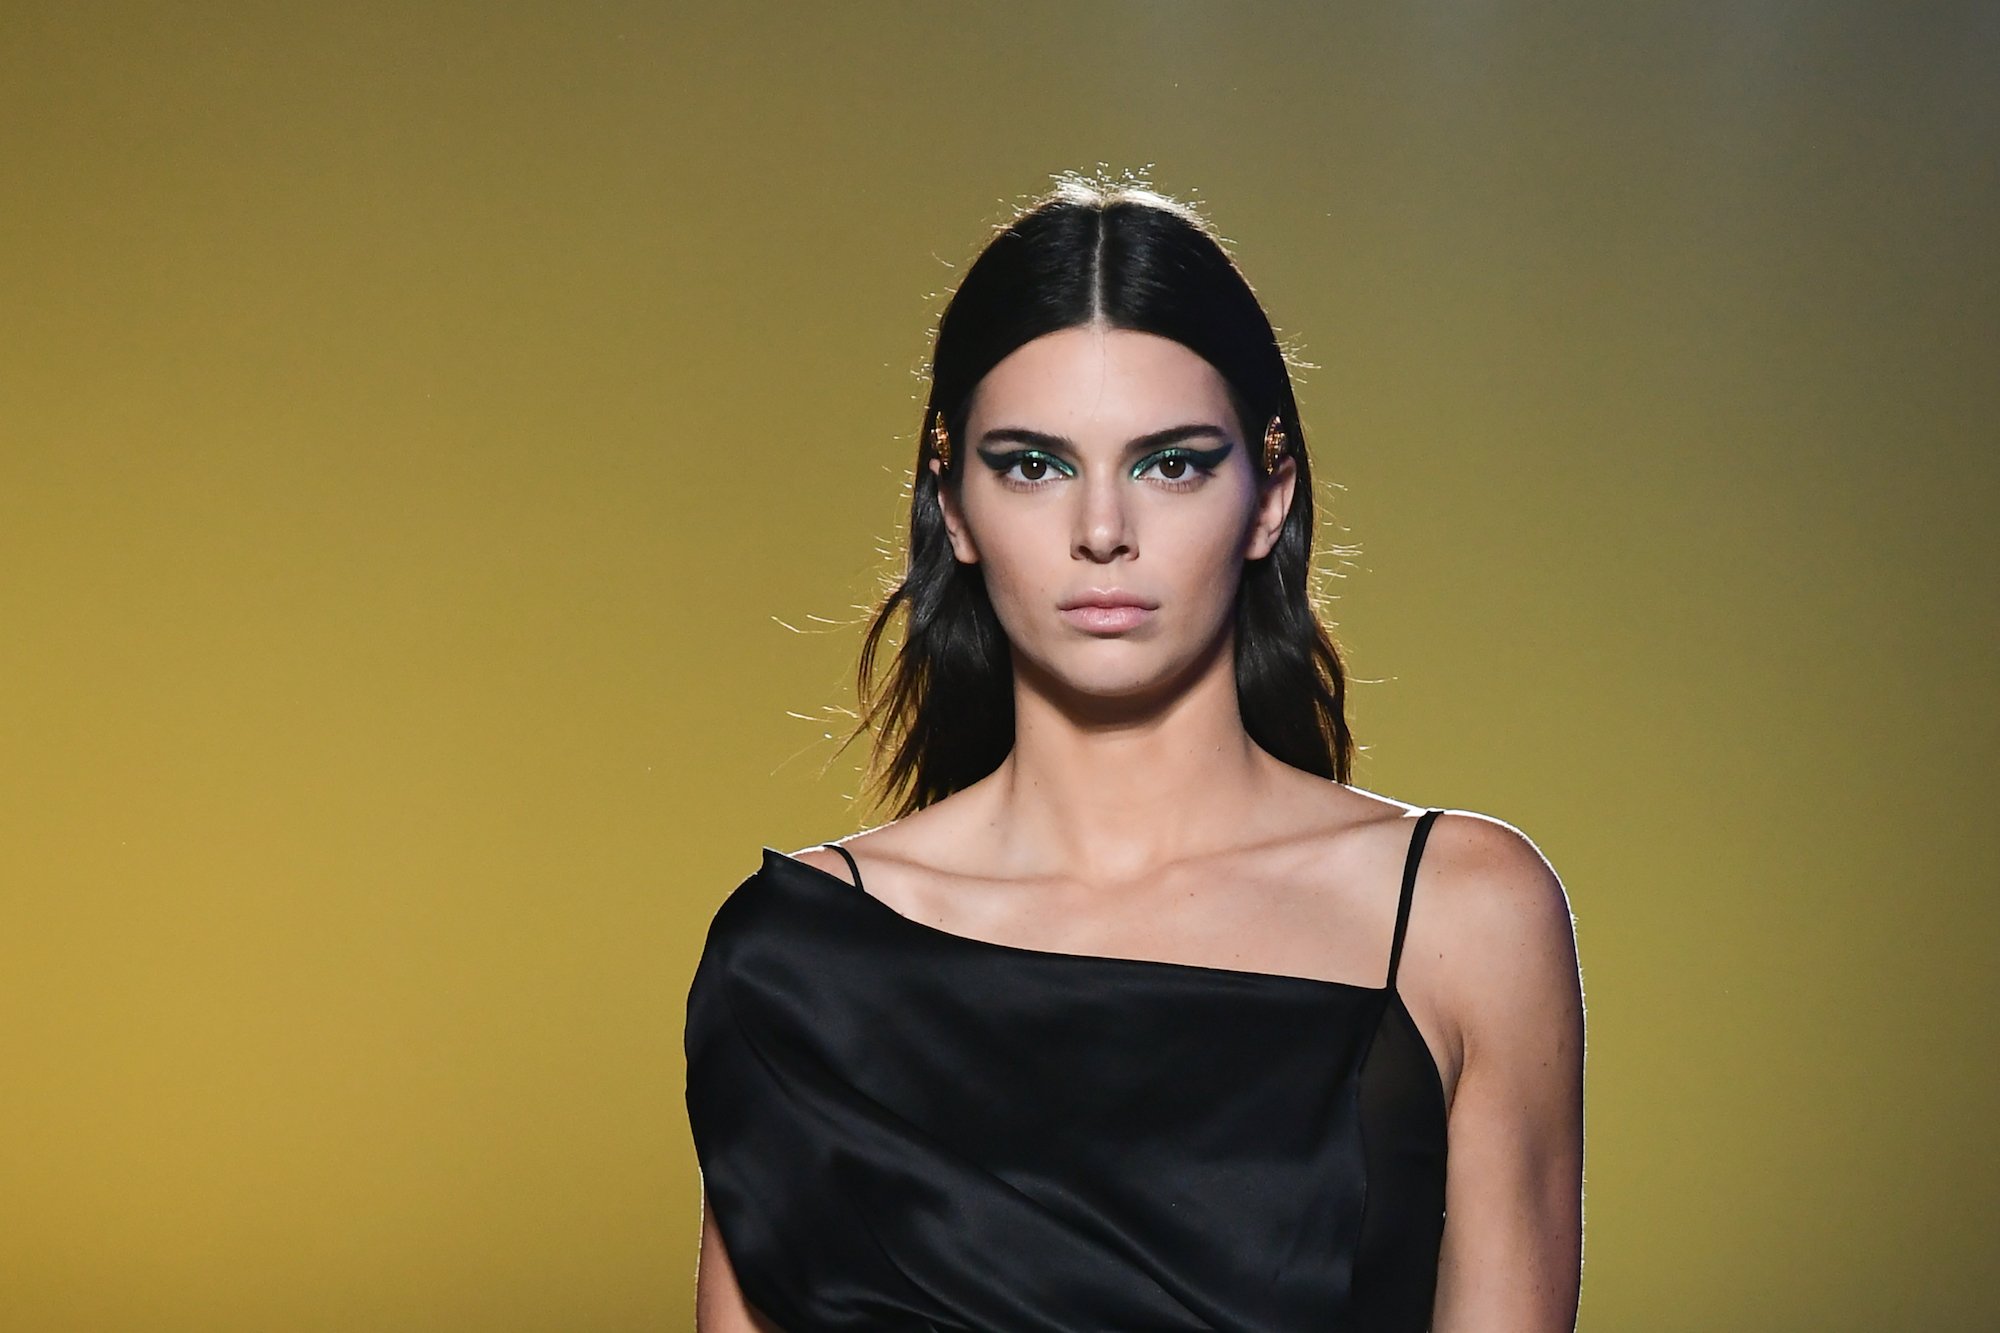 Kendall Jenner walking on a runway not smiling